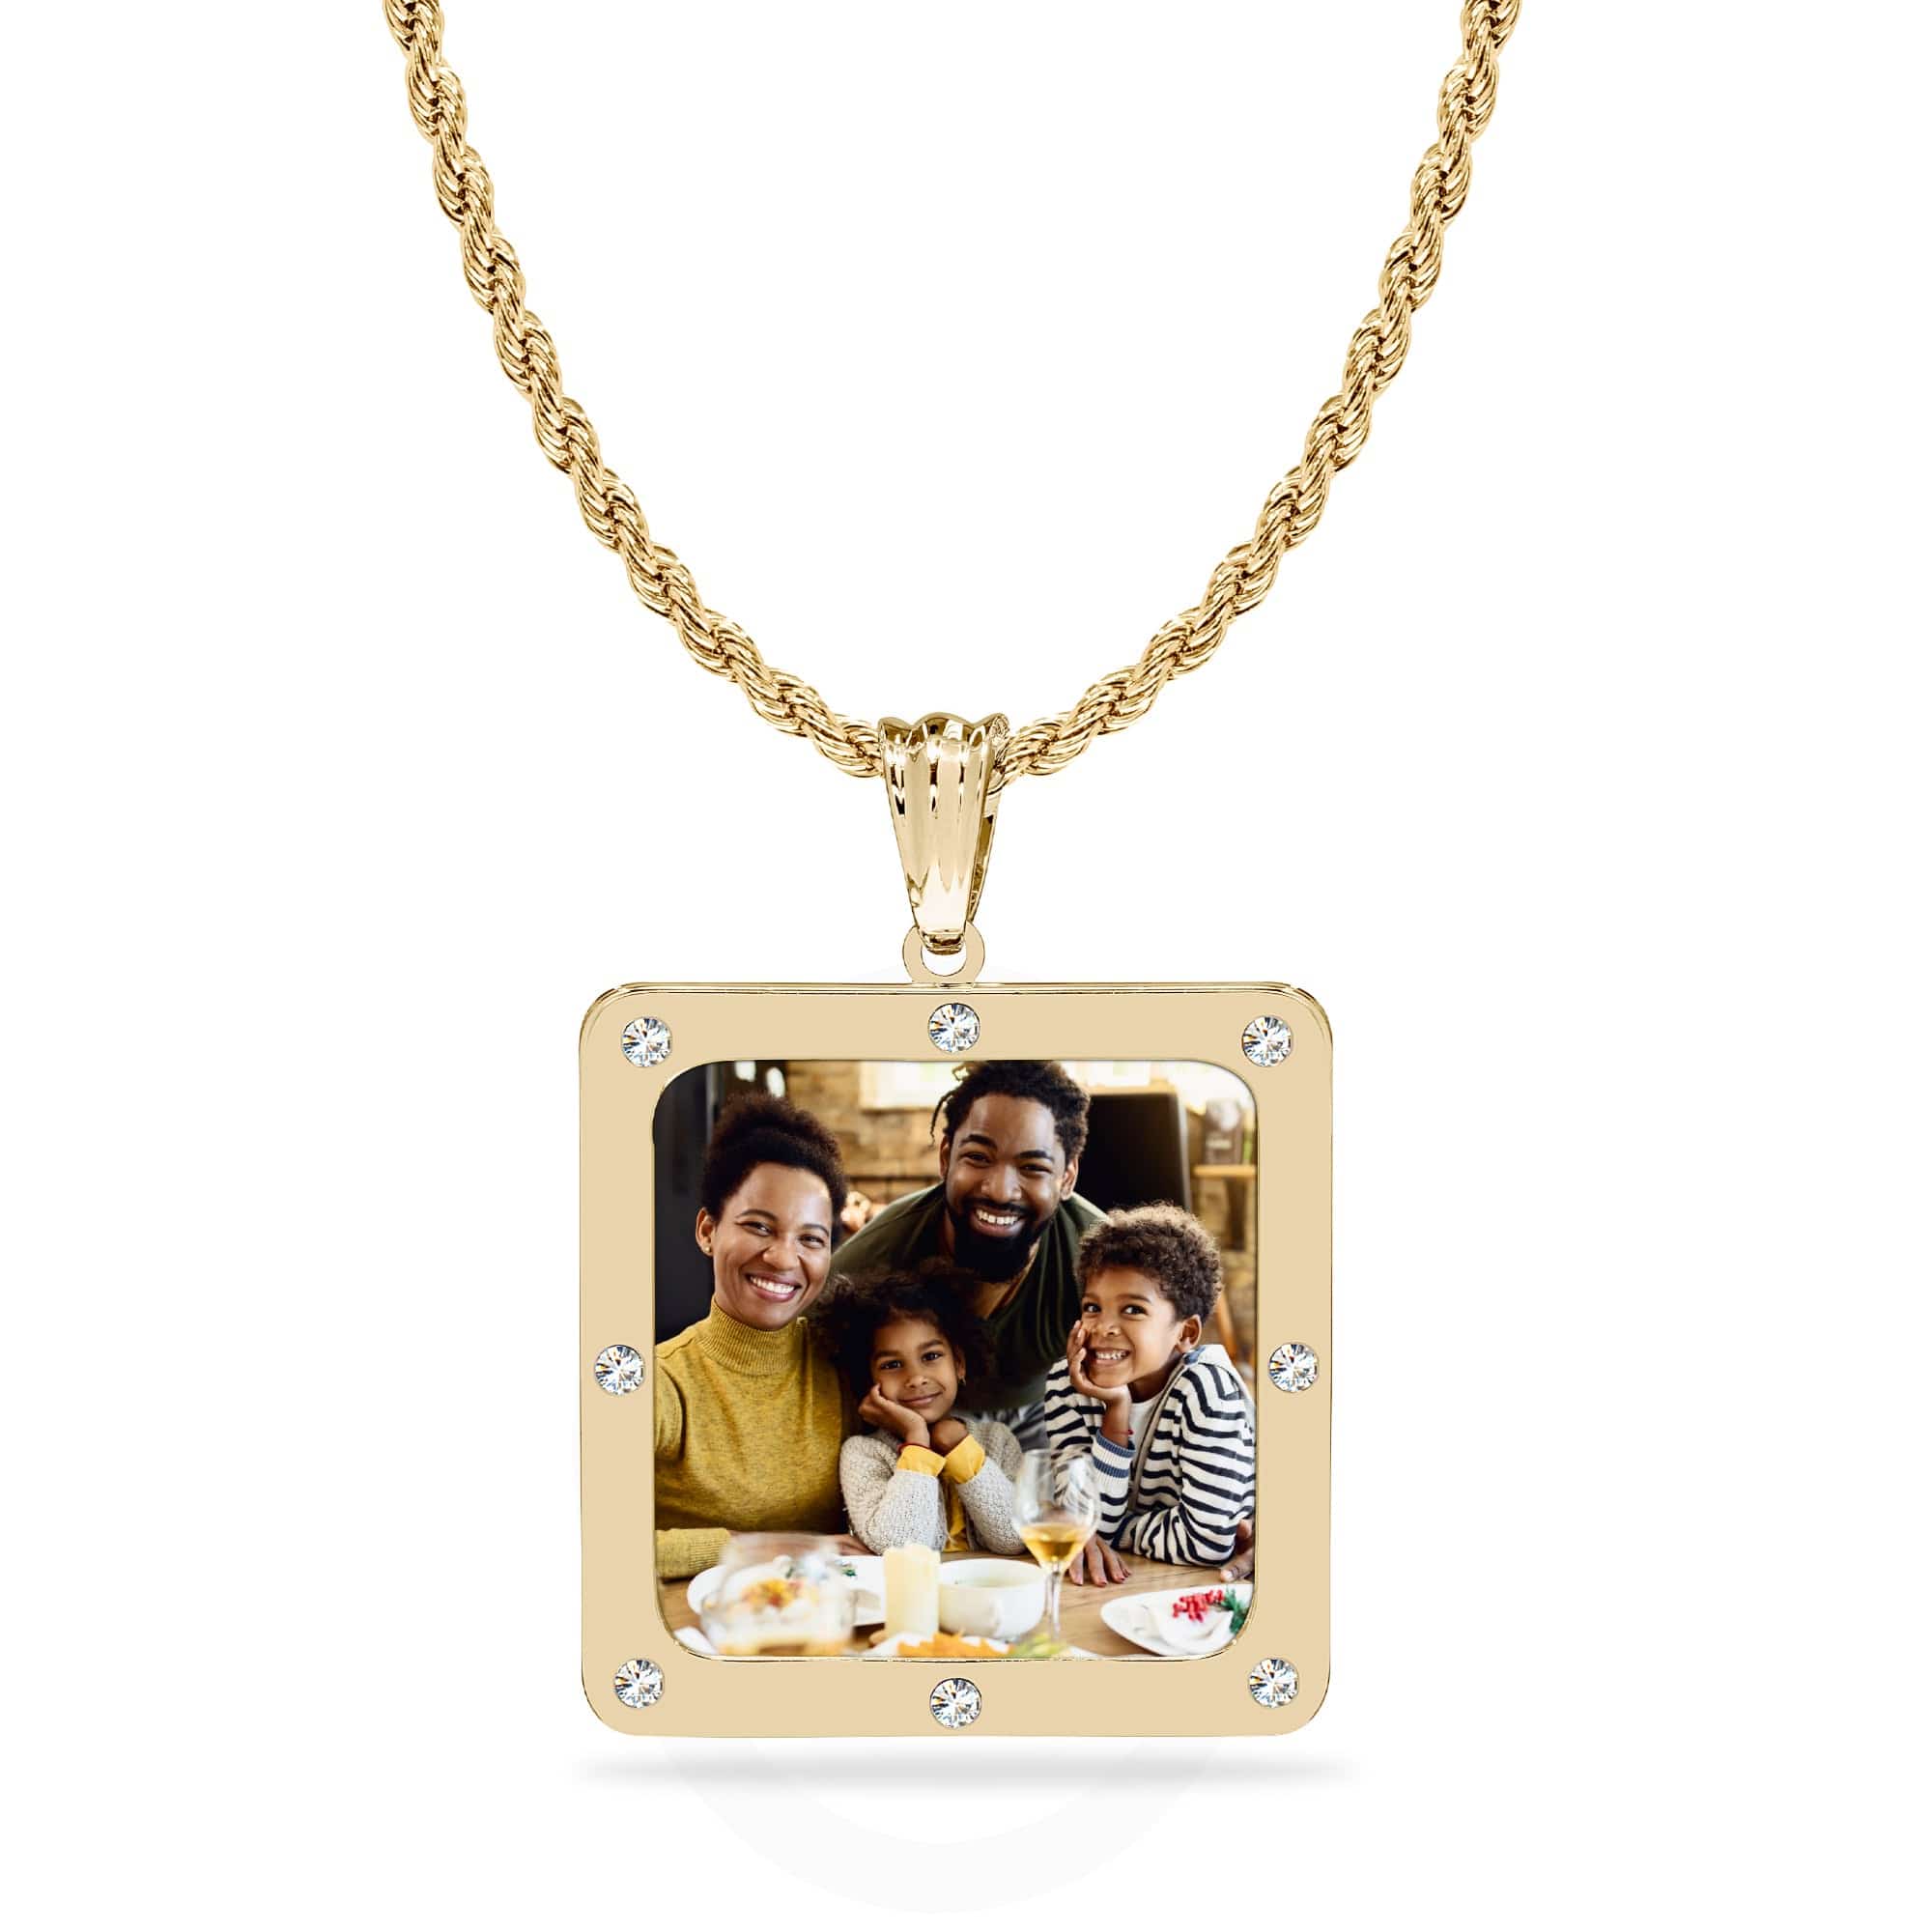 Copy of High Polished Square Photo Pendant